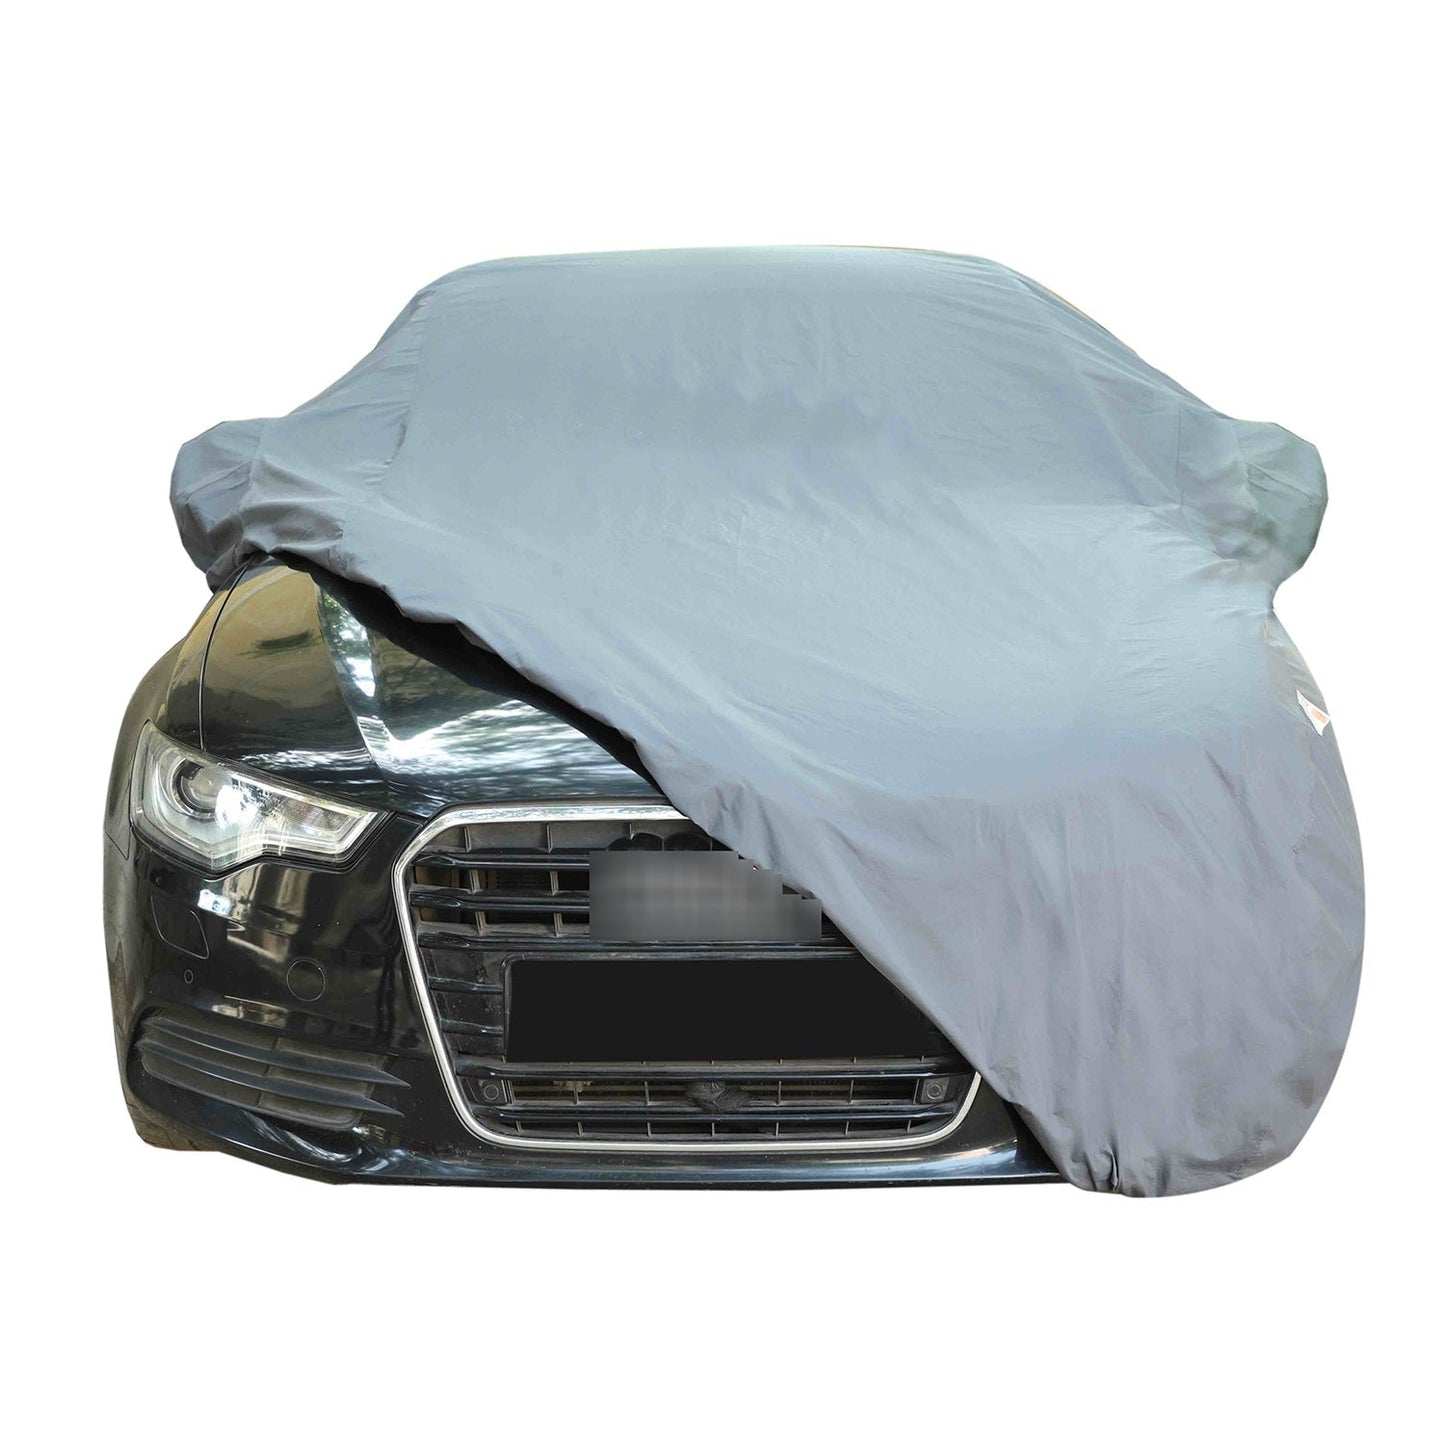 Oshotto Dark Grey 100% Anti Reflective, dustproof and Water Proof Car Body Cover with Mirror Pockets For Nissan Sunny